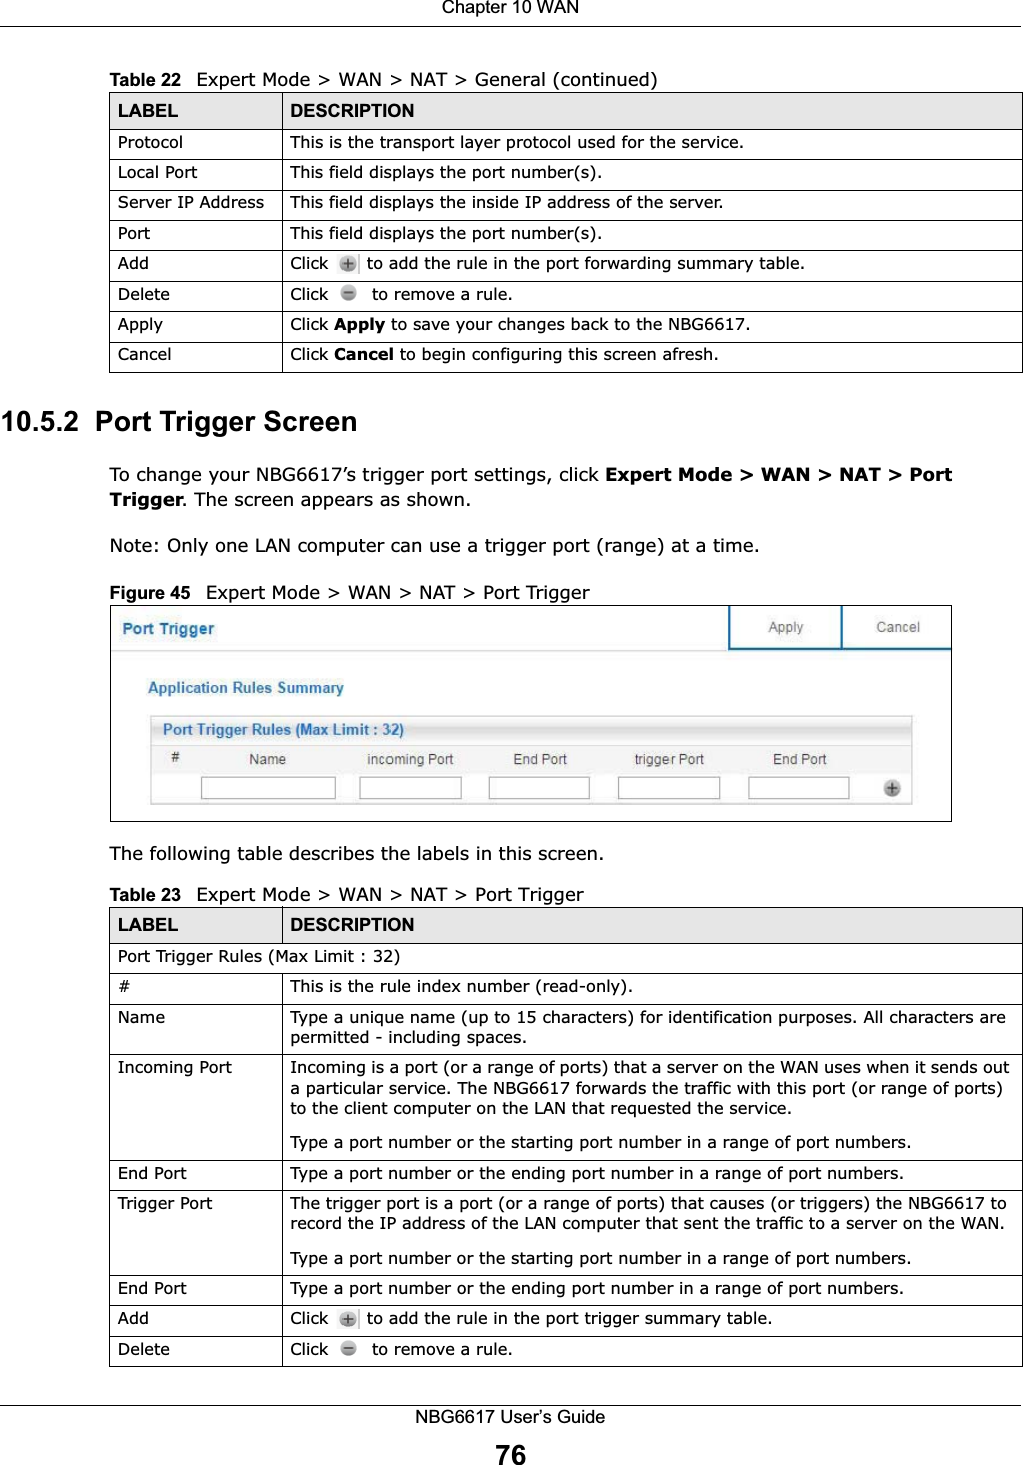 Chapter 10 WANNBG6617 User’s Guide7610.5.2  Port Trigger ScreenTo change your NBG6617’s trigger port settings, click Expert Mode &gt; WAN &gt; NAT &gt; Port Trigger. The screen appears as shown.Note: Only one LAN computer can use a trigger port (range) at a time.Figure 45   Expert Mode &gt; WAN &gt; NAT &gt; Port TriggerThe following table describes the labels in this screen.Protocol This is the transport layer protocol used for the service.Local Port This field displays the port number(s). Server IP Address This field displays the inside IP address of the server.Port This field displays the port number(s). Add Click   to add the rule in the port forwarding summary table.Delete Click   to remove a rule.Apply Click Apply to save your changes back to the NBG6617.Cancel Click Cancel to begin configuring this screen afresh.Table 22   Expert Mode &gt; WAN &gt; NAT &gt; General (continued)LABEL DESCRIPTIONTable 23   Expert Mode &gt; WAN &gt; NAT &gt; Port TriggerLABEL DESCRIPTIONPort Trigger Rules (Max Limit : 32)#This is the rule index number (read-only).Name Type a unique name (up to 15 characters) for identification purposes. All characters are permitted - including spaces.Incoming Port Incoming is a port (or a range of ports) that a server on the WAN uses when it sends out a particular service. The NBG6617 forwards the traffic with this port (or range of ports) to the client computer on the LAN that requested the service. Type a port number or the starting port number in a range of port numbers.End Port Type a port number or the ending port number in a range of port numbers.Trigger Port The trigger port is a port (or a range of ports) that causes (or triggers) the NBG6617 to record the IP address of the LAN computer that sent the traffic to a server on the WAN.Type a port number or the starting port number in a range of port numbers.End Port Type a port number or the ending port number in a range of port numbers.Add Click   to add the rule in the port trigger summary table.Delete Click   to remove a rule.